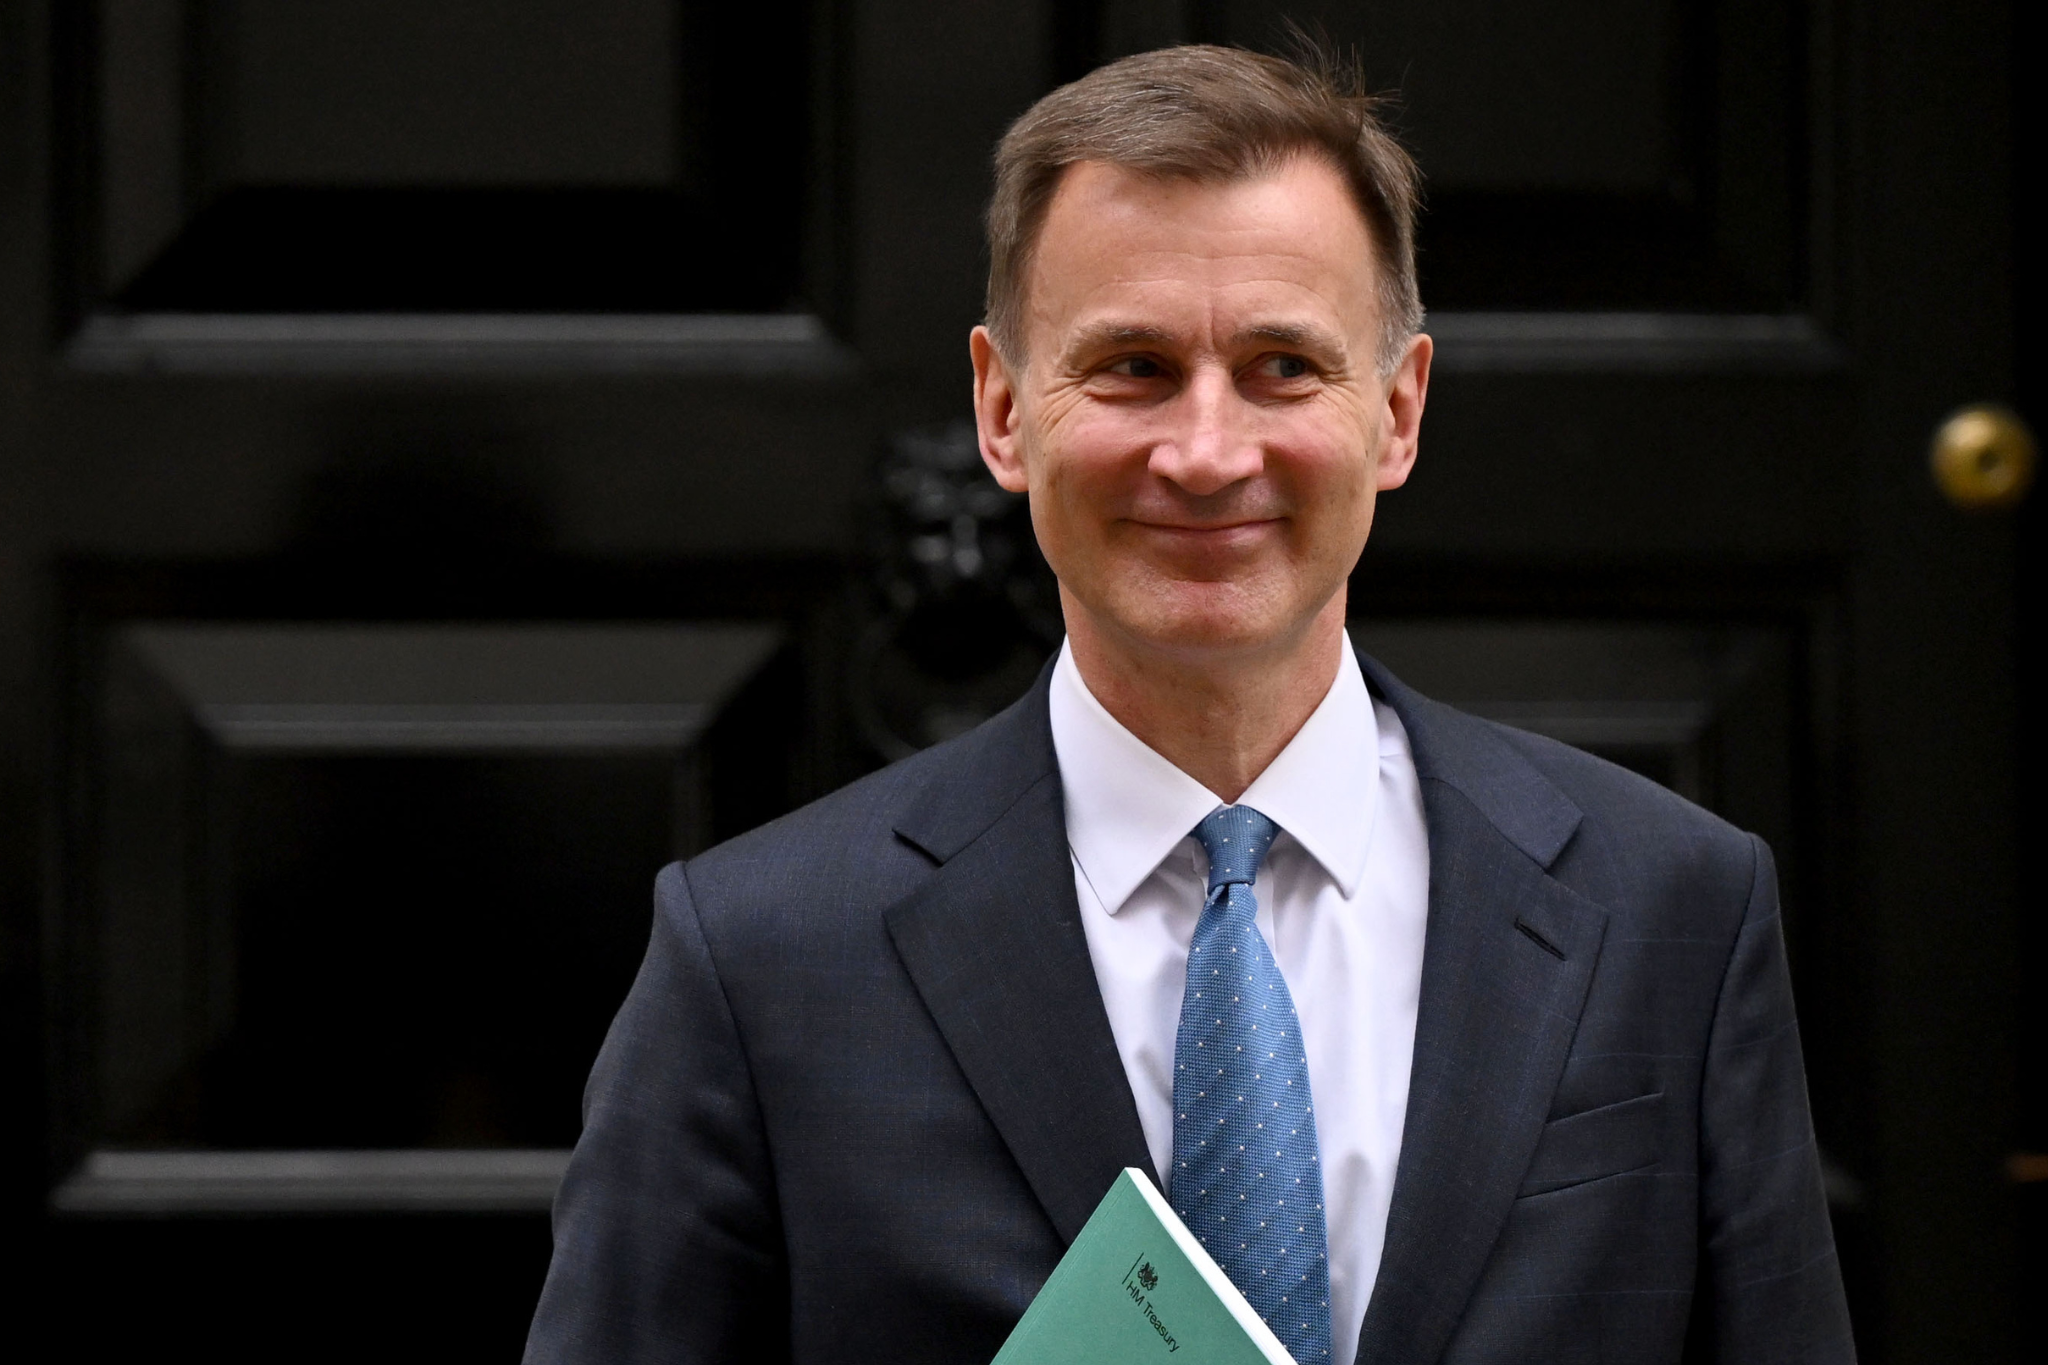 Jeremy Hunt delivered some tax cuts, but faced criticism for overall tax burden and public spending cuts ahead